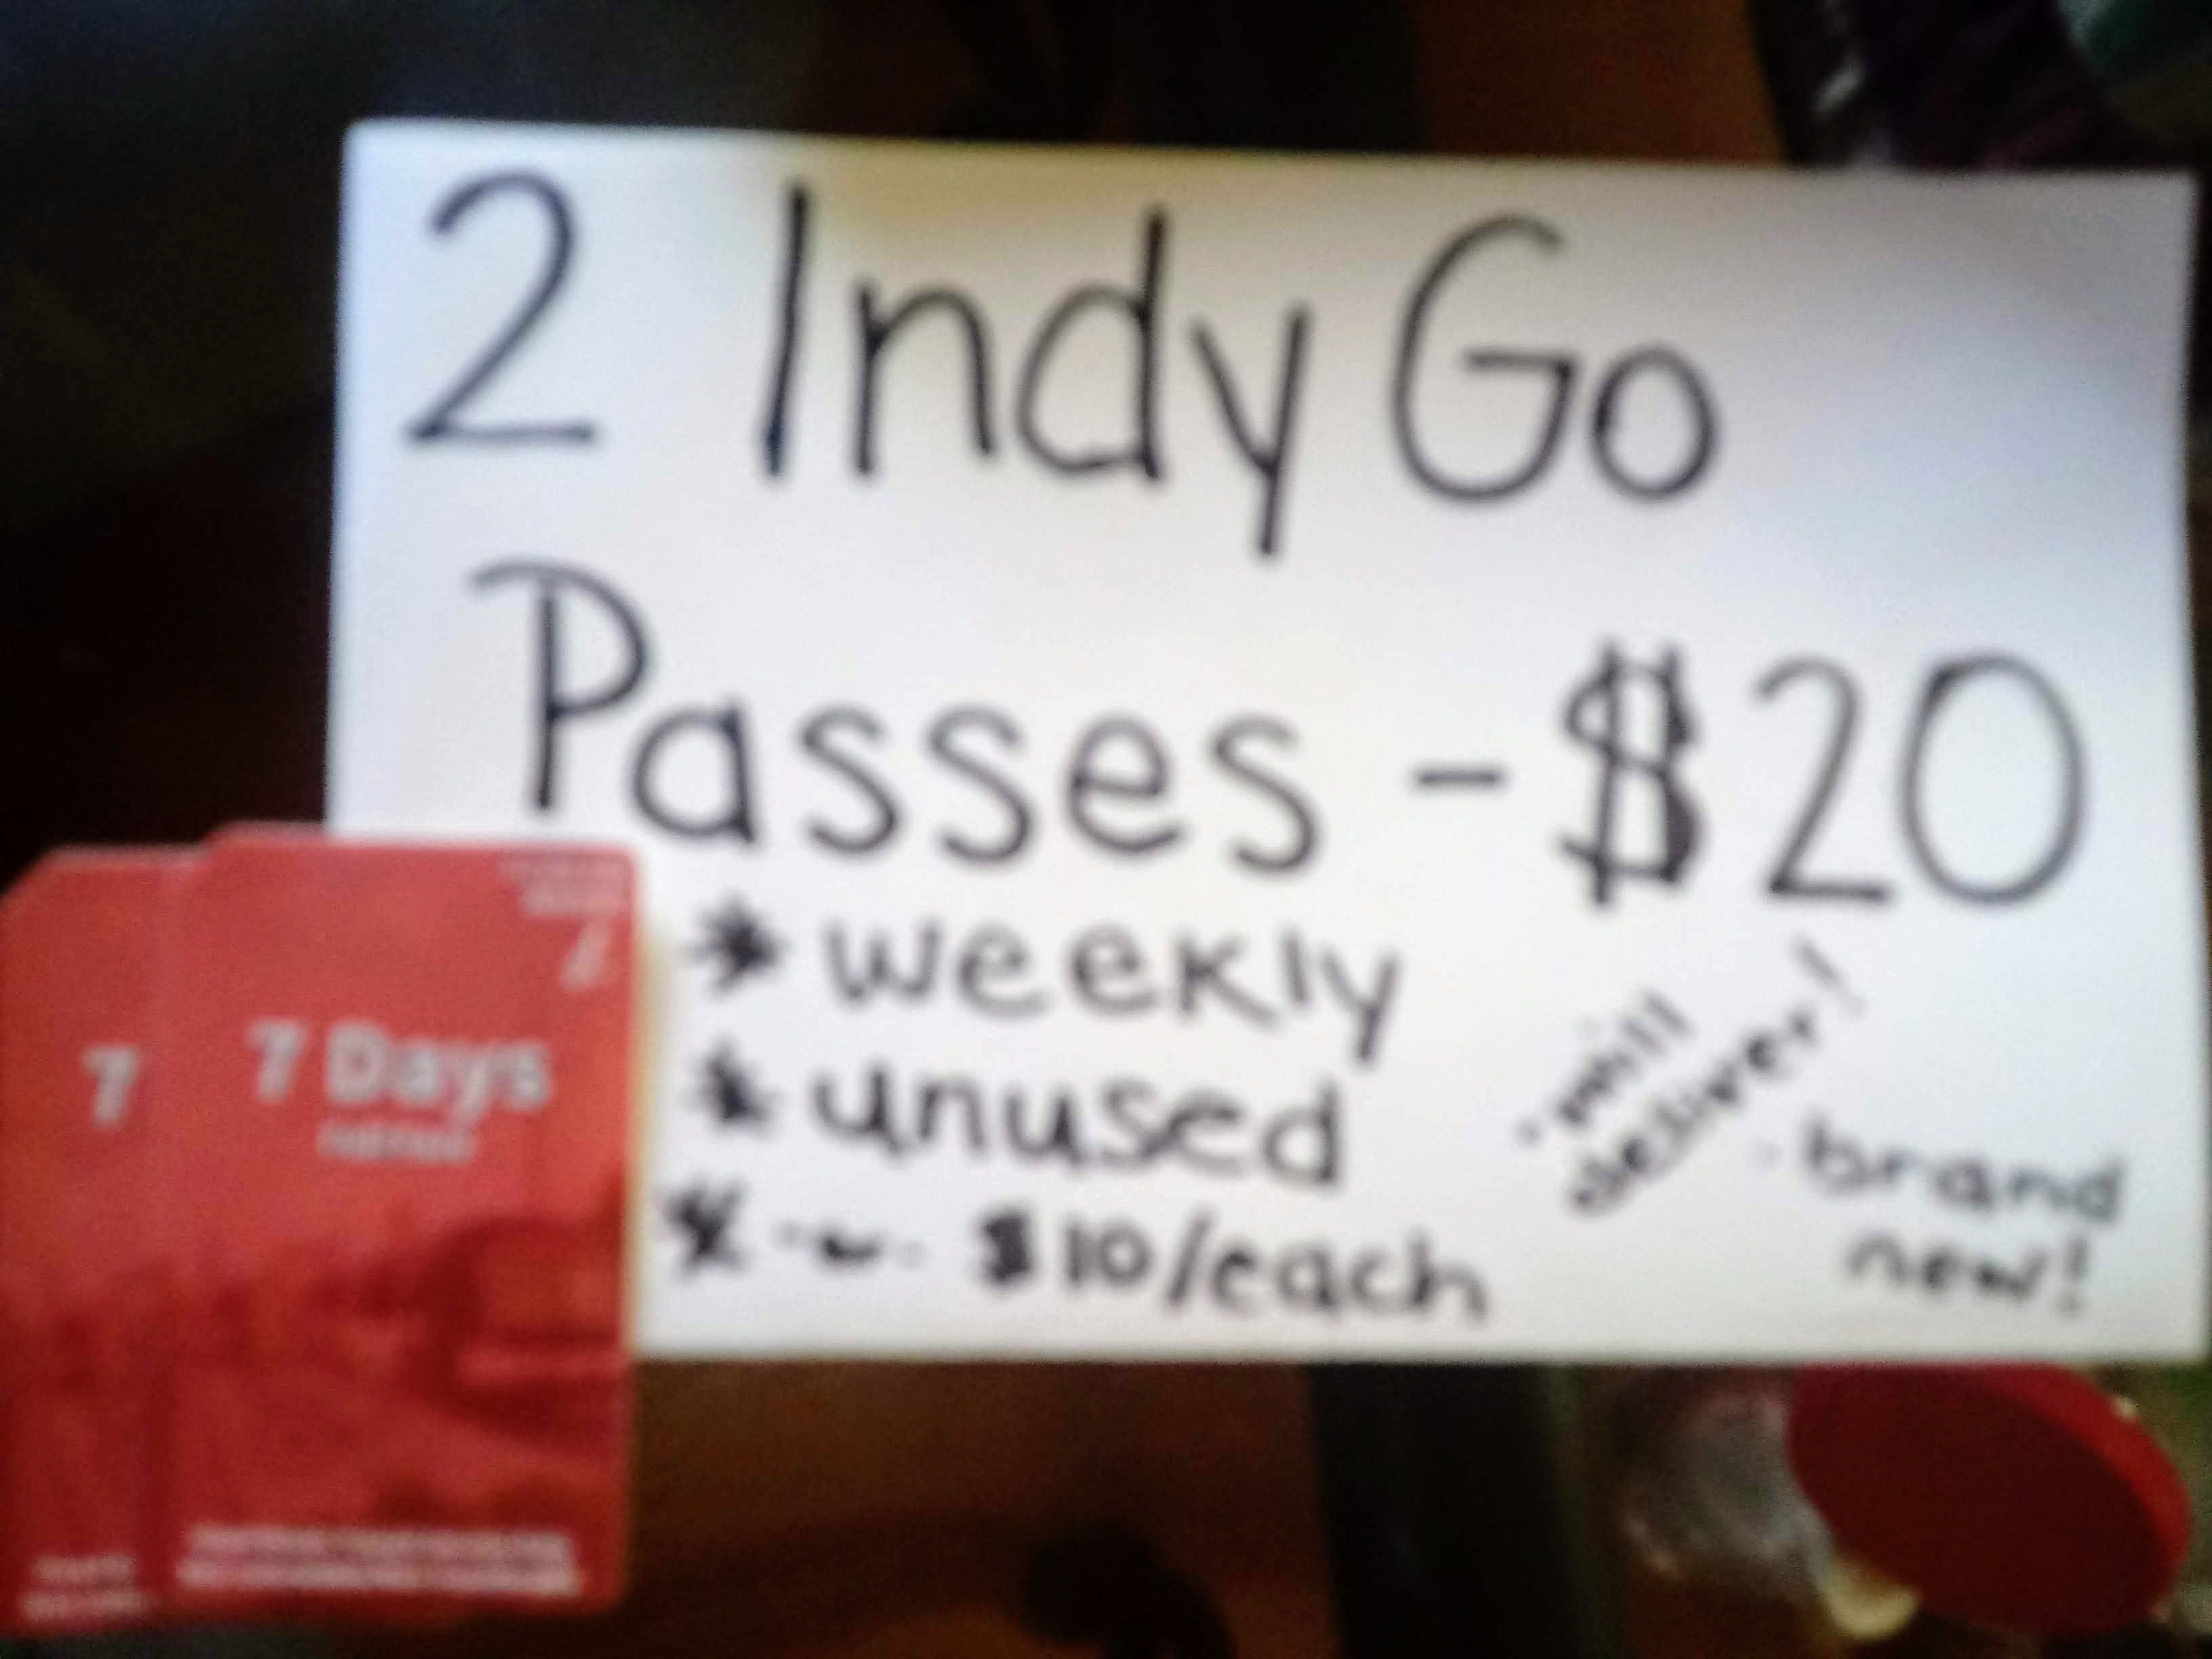 Two IndyGo Week Passes